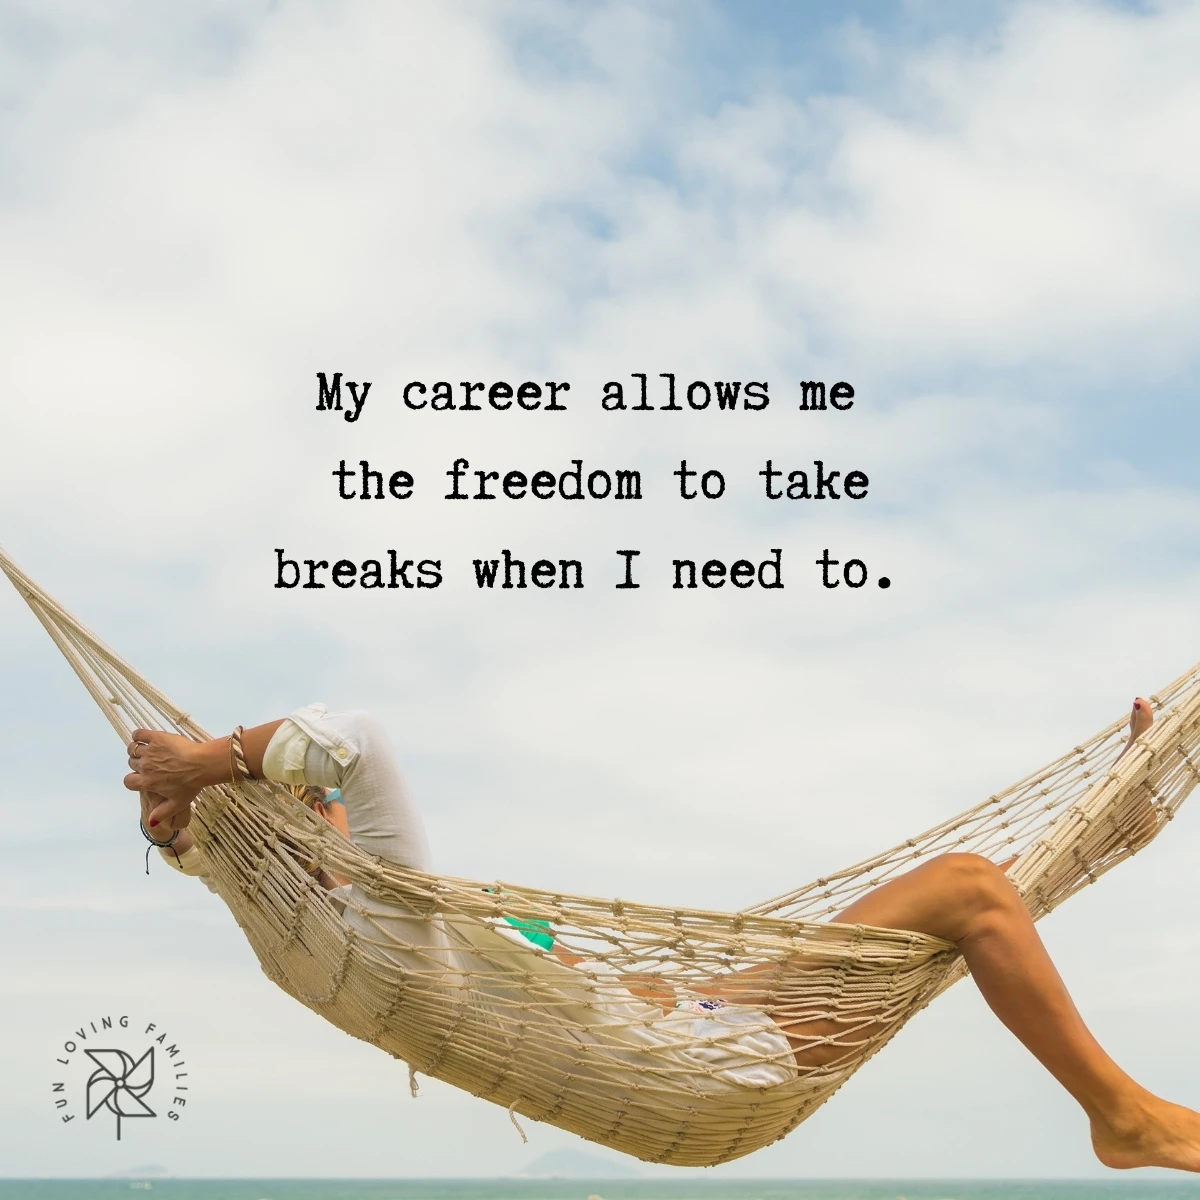 My career allows me the freedom to take breaks when I need to affirmation